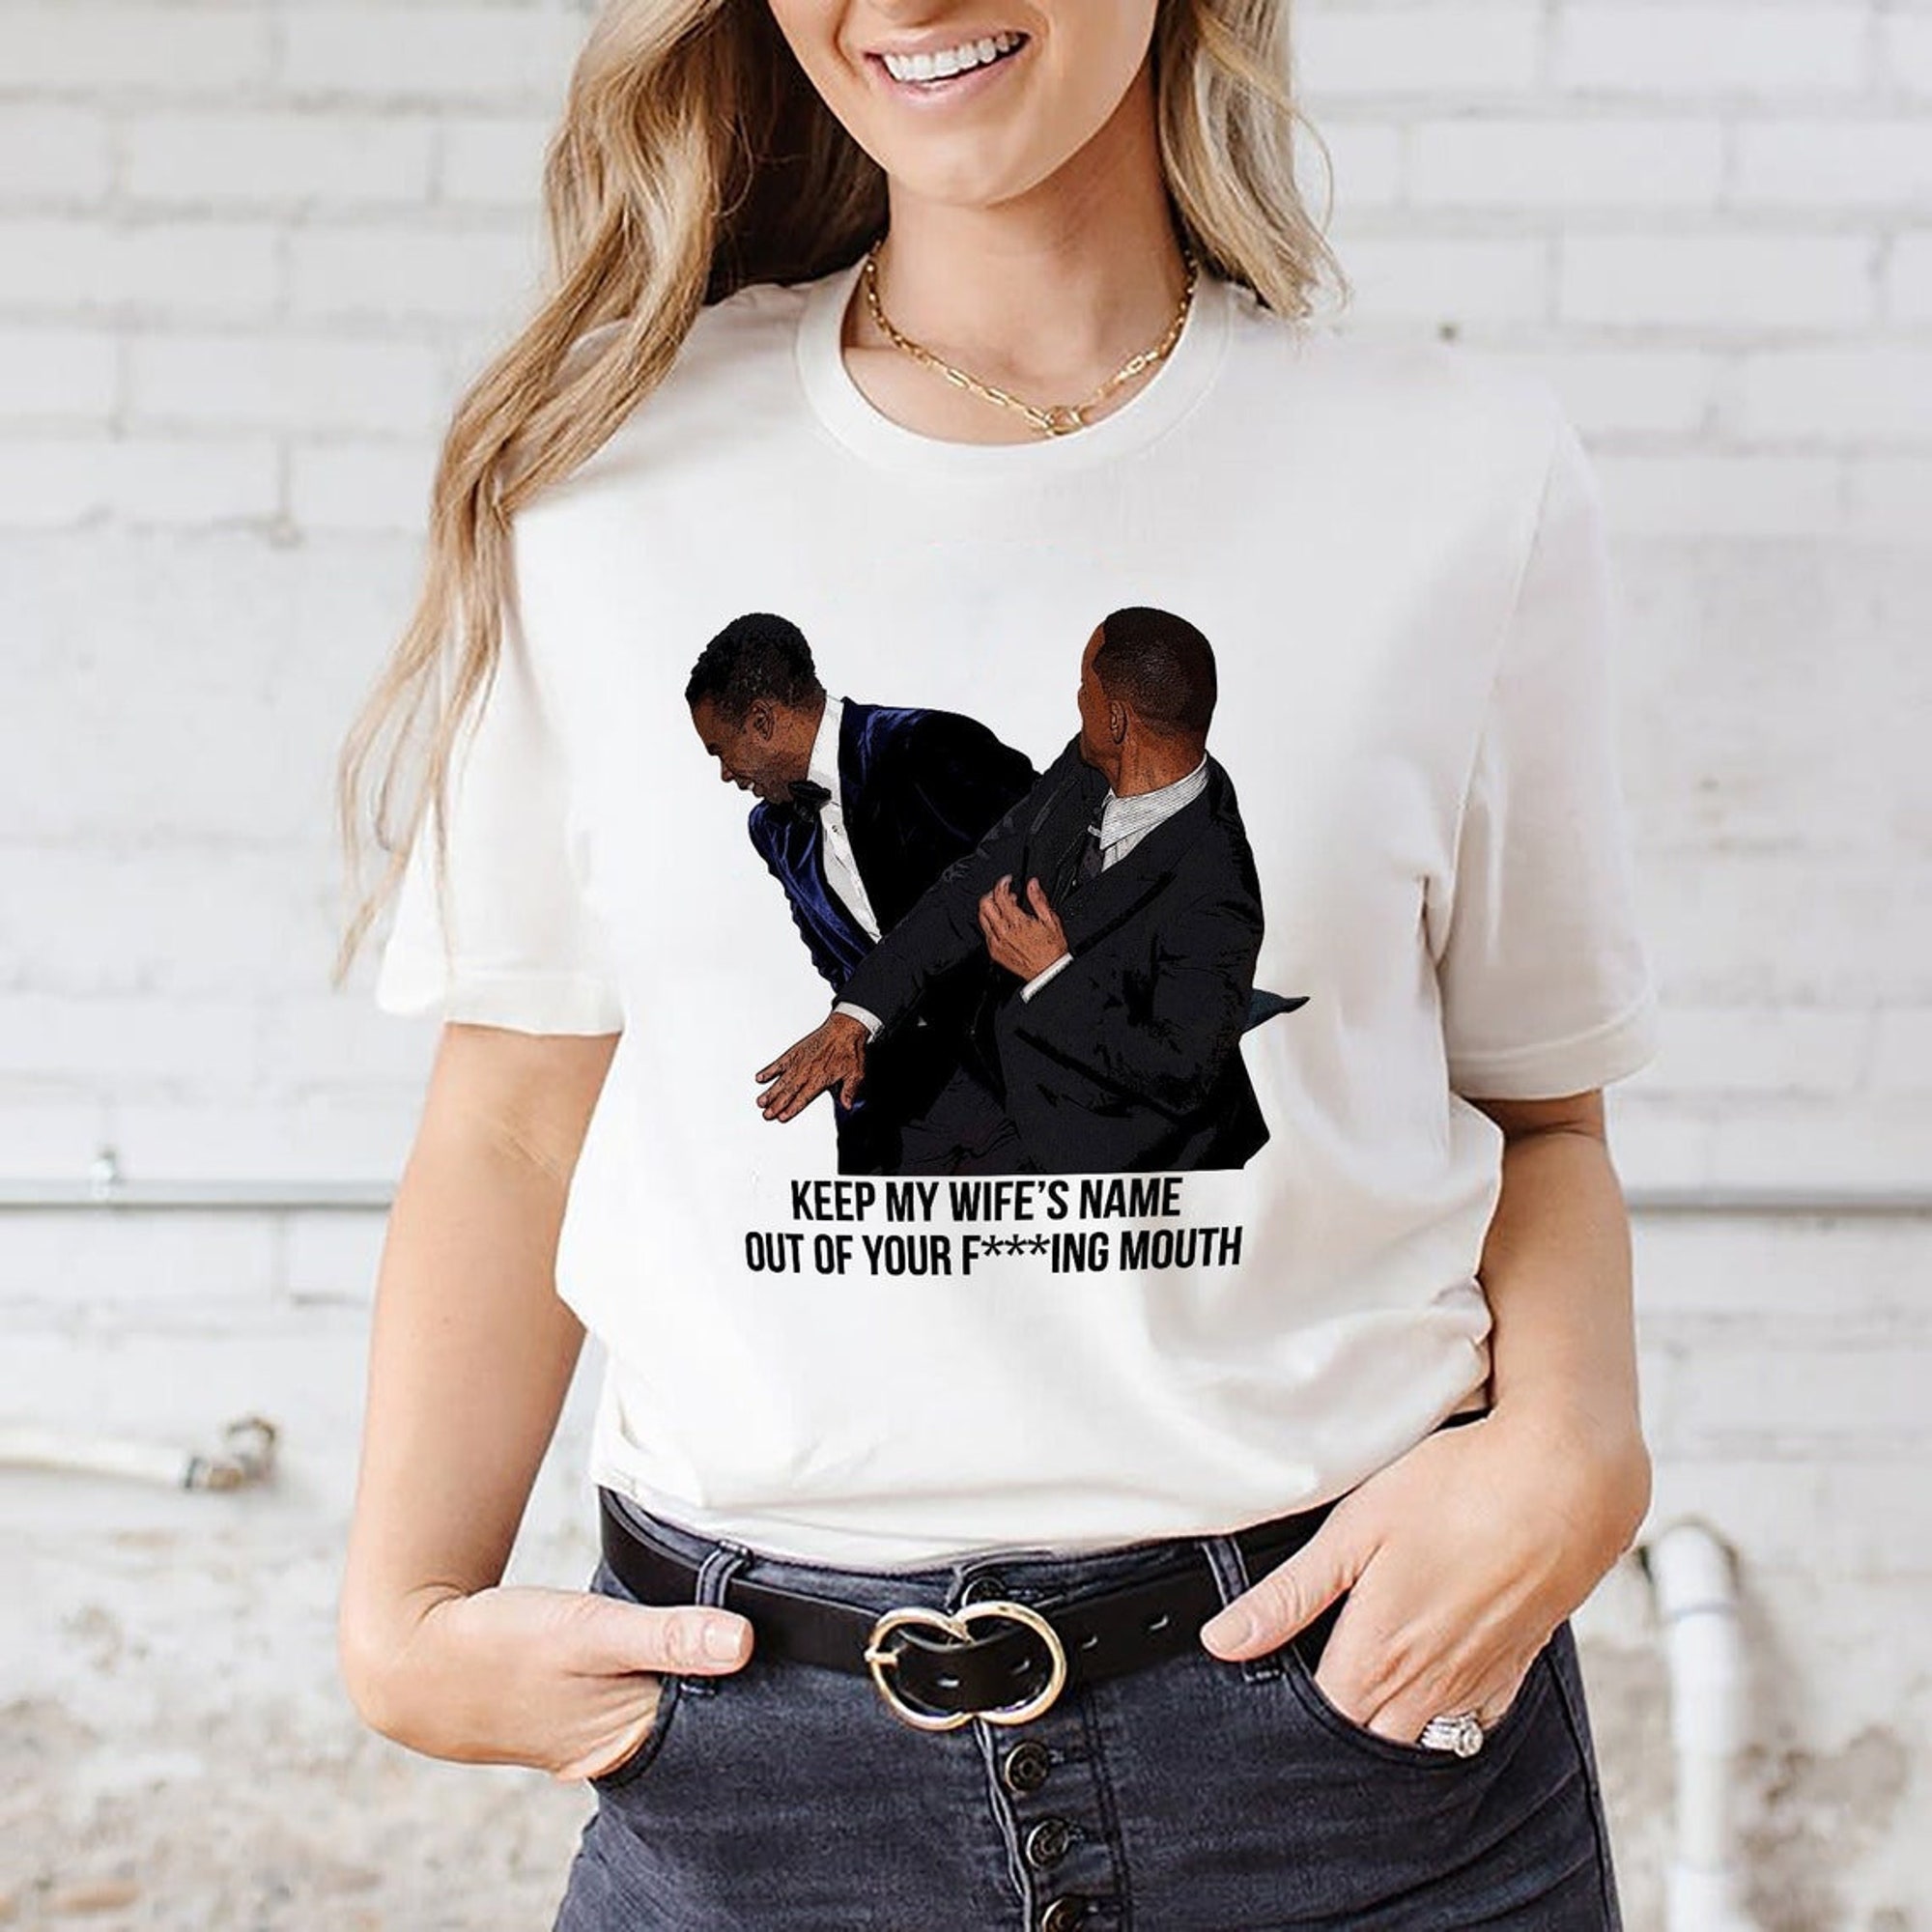 Will Smith Oscars 2022 Shirt, Keep My Wife's Name Out Of Your Fucking Mouth, Will Smith Chris Rock